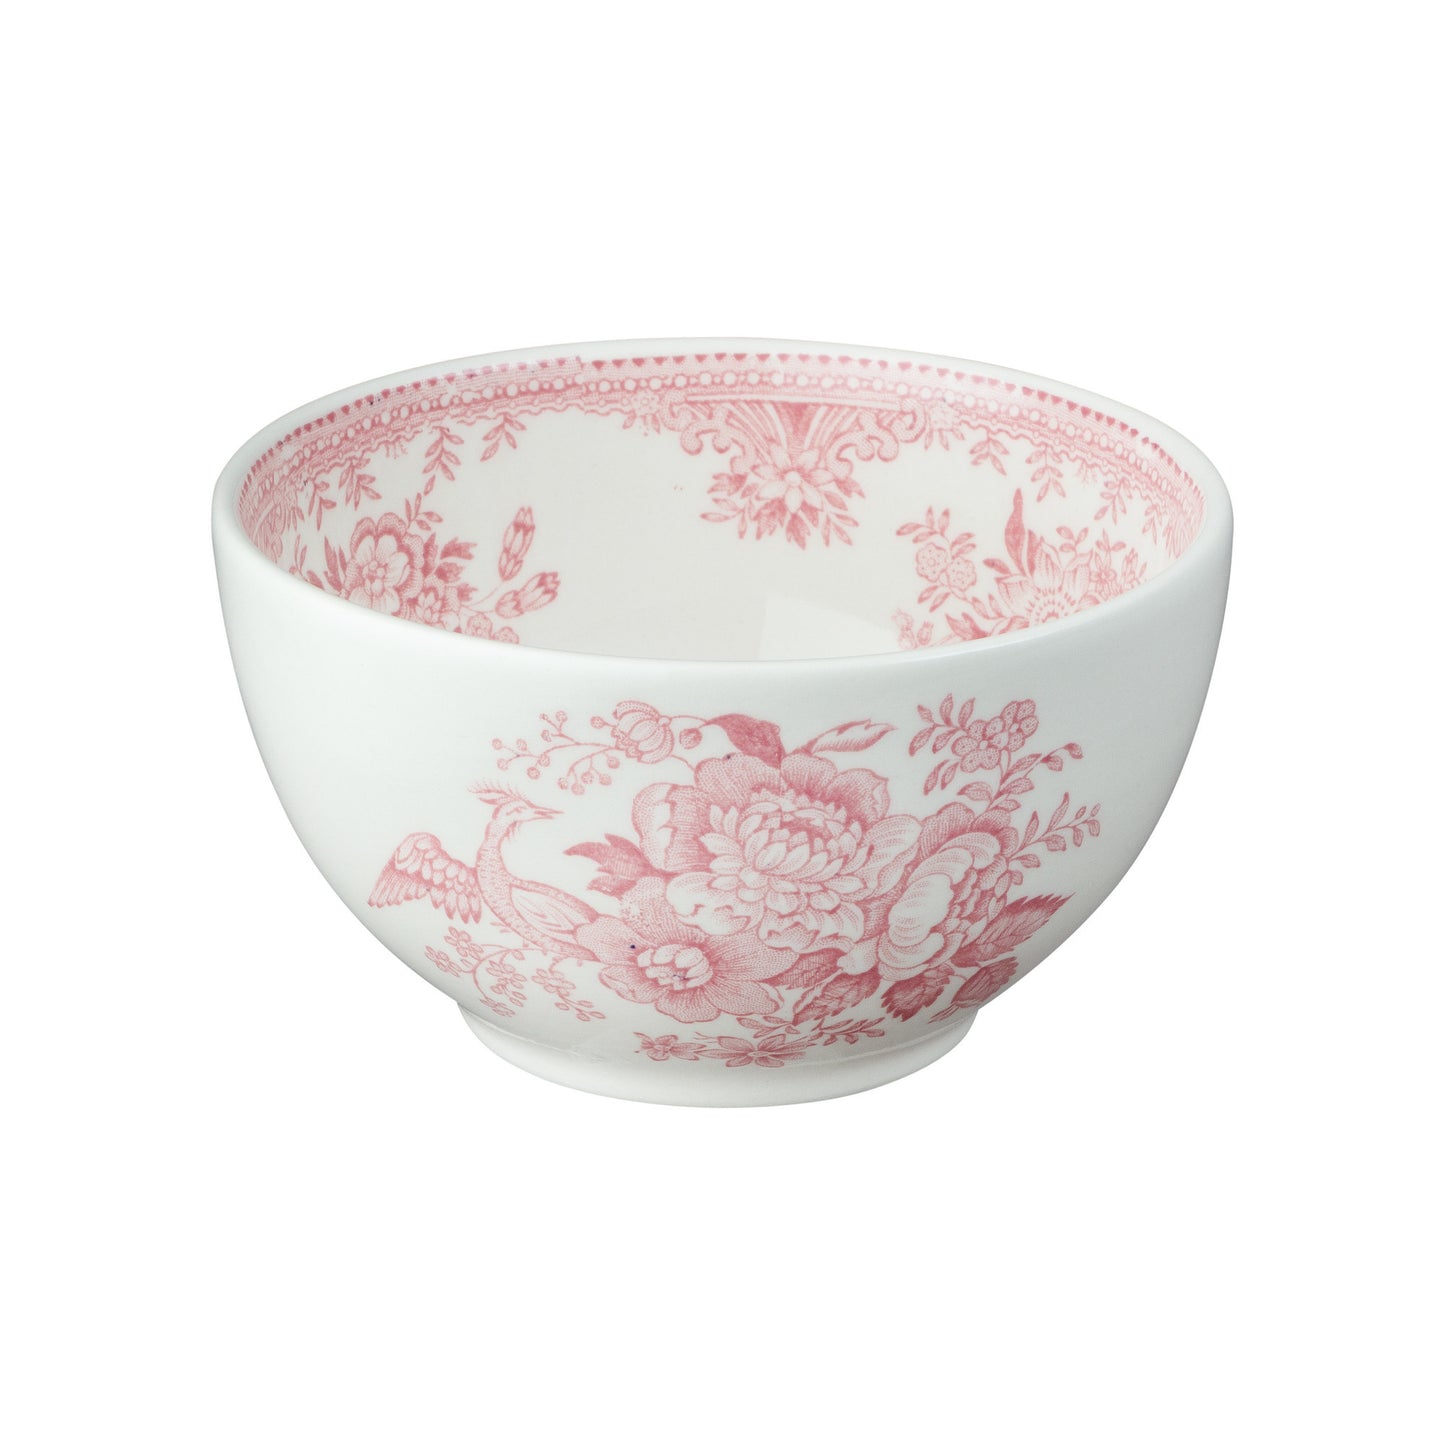 Pink Asiatic Pheasants Mini Footed Bowl 12cm/5"